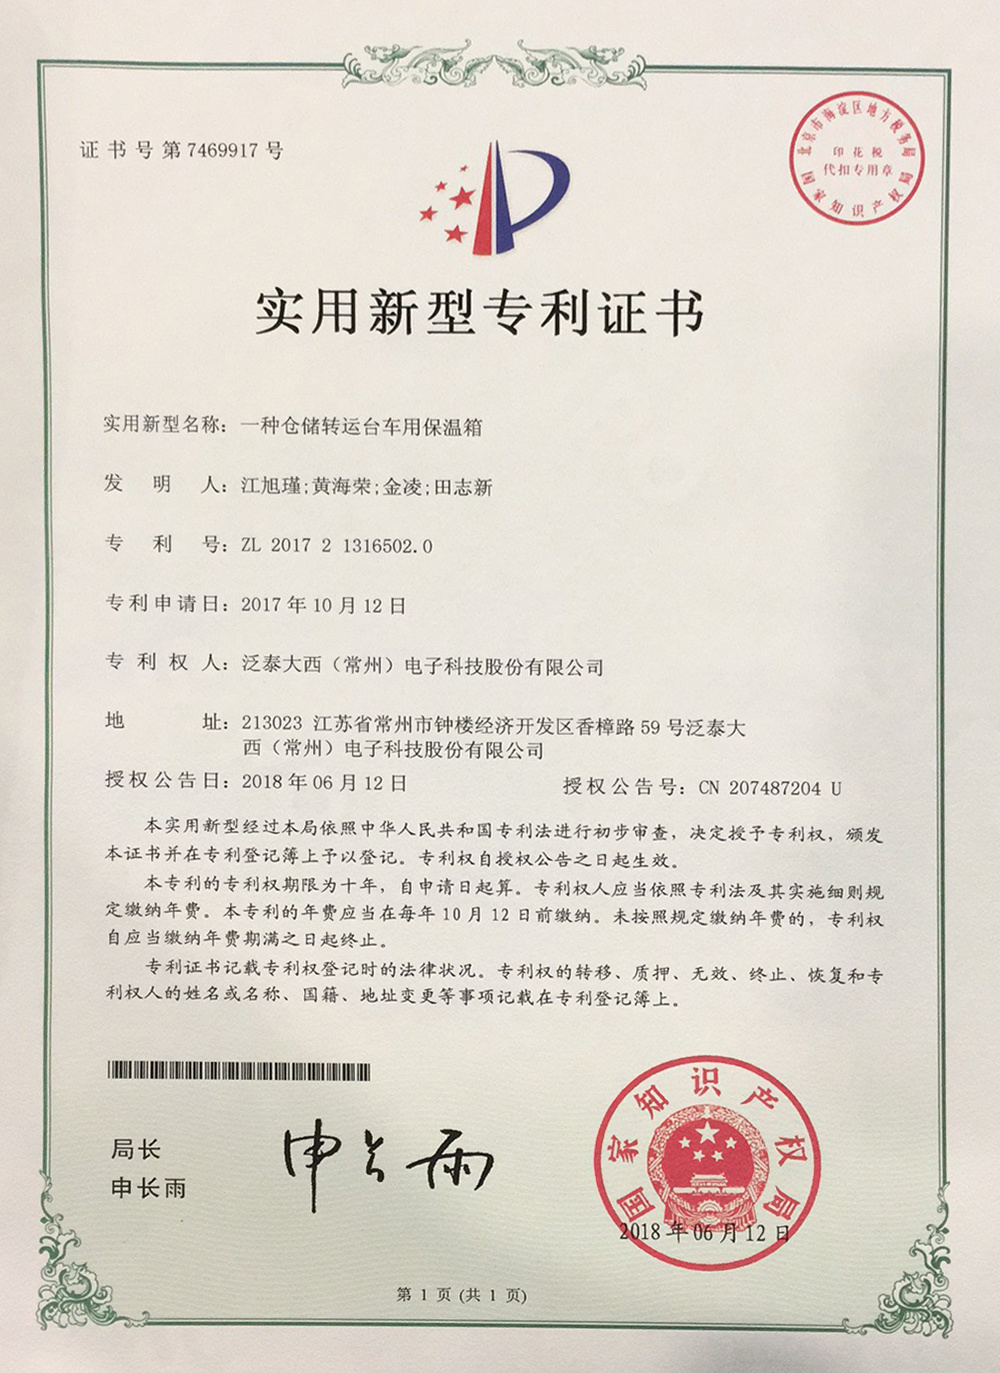 Patent certificate for incubator for storage and transfer trolley